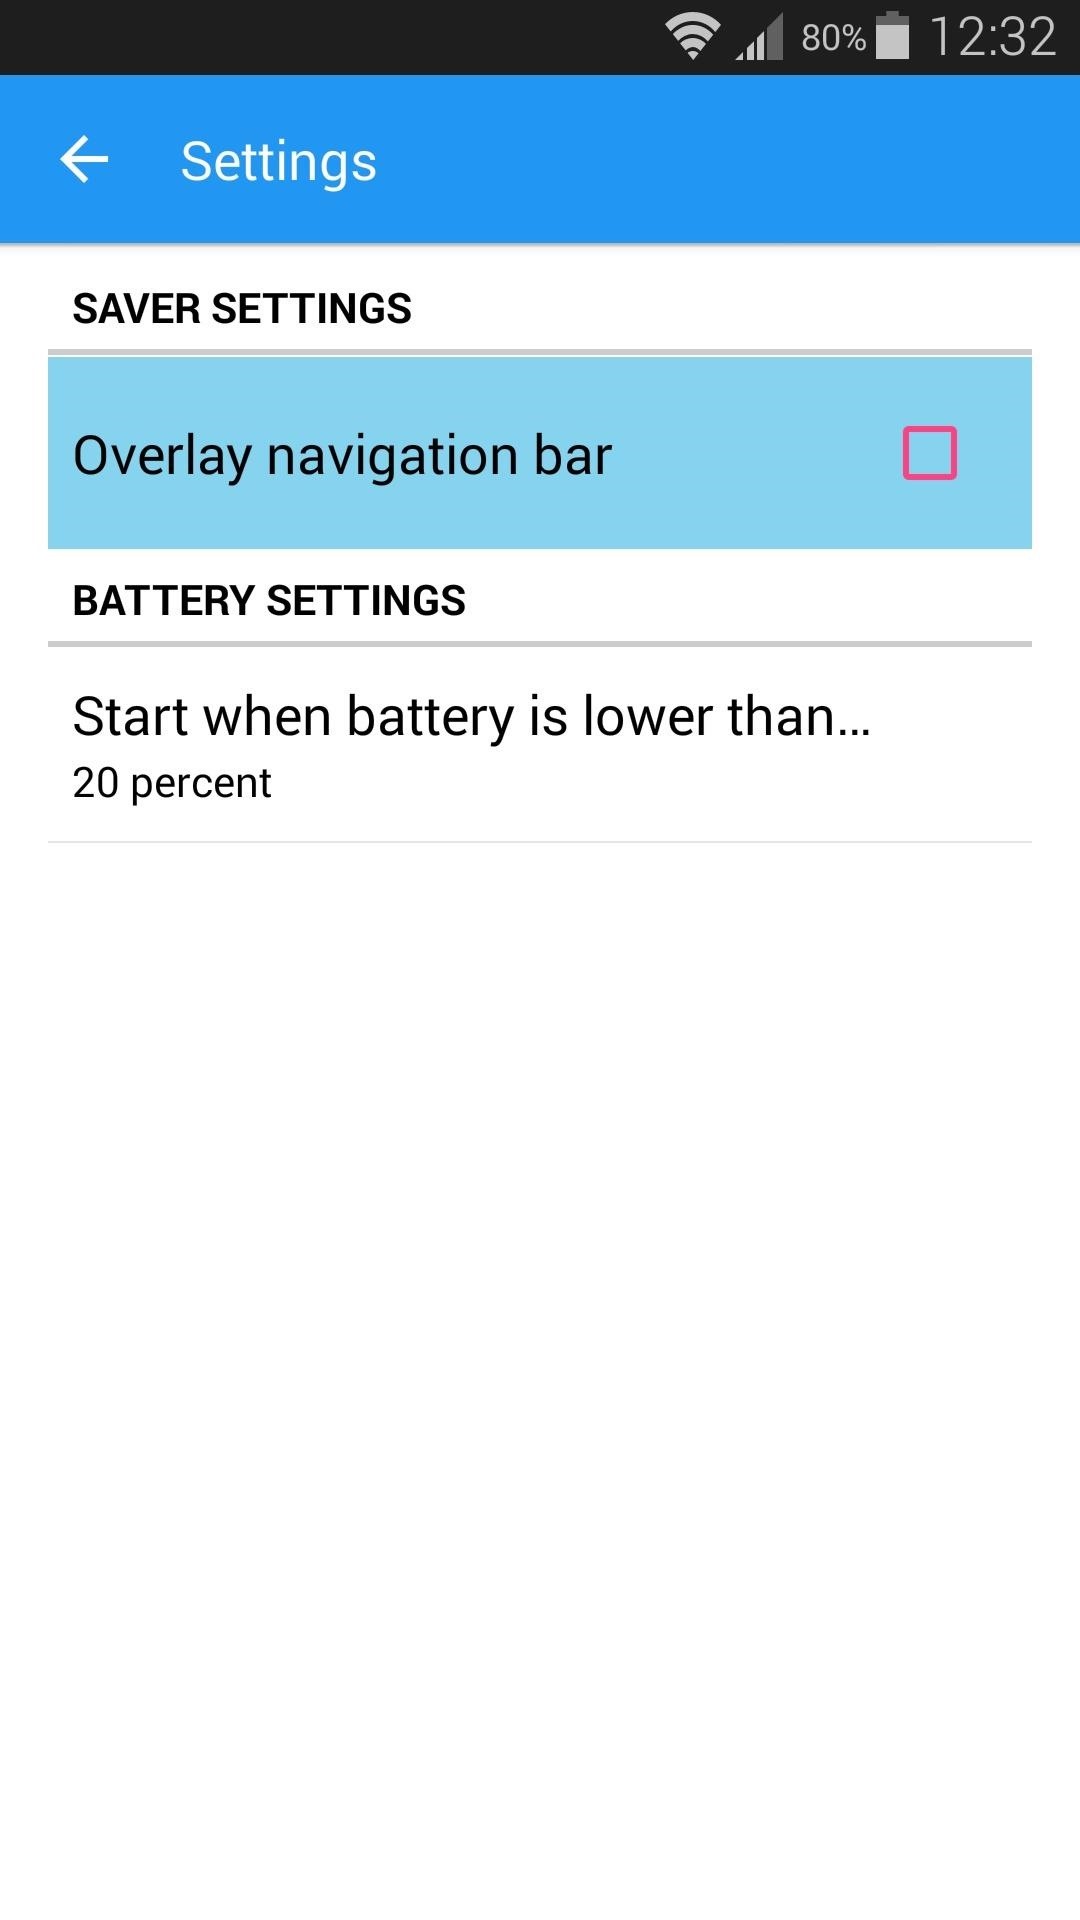 Save Battery Life on Android by Turning Off Pixels (No Root Required)